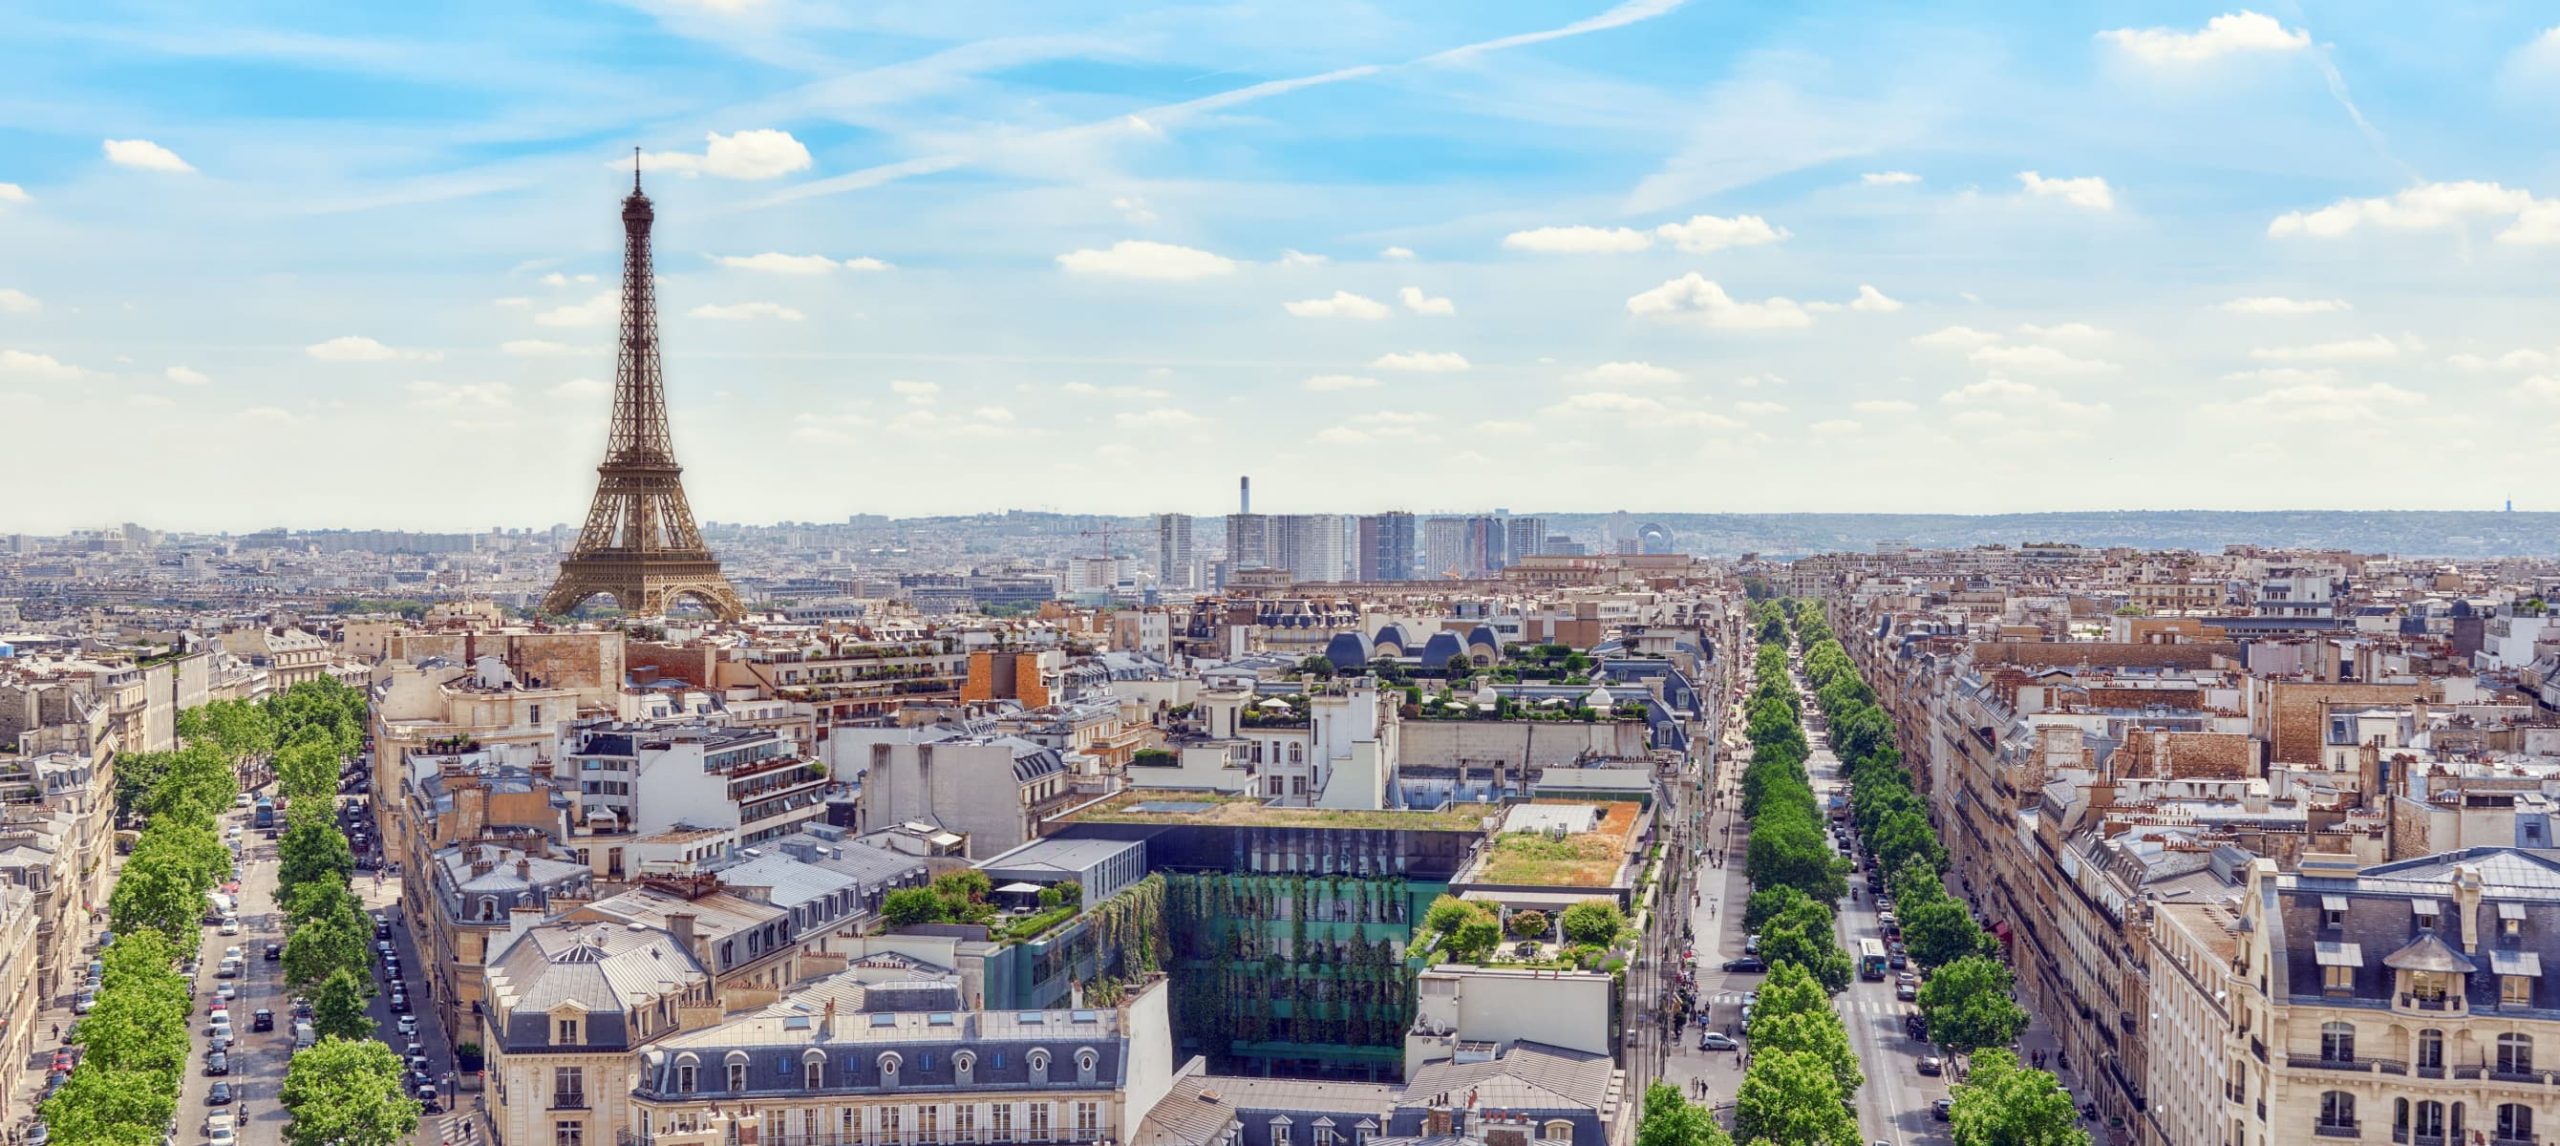 7 Best Things To Do In Paris For First-Time Visitors